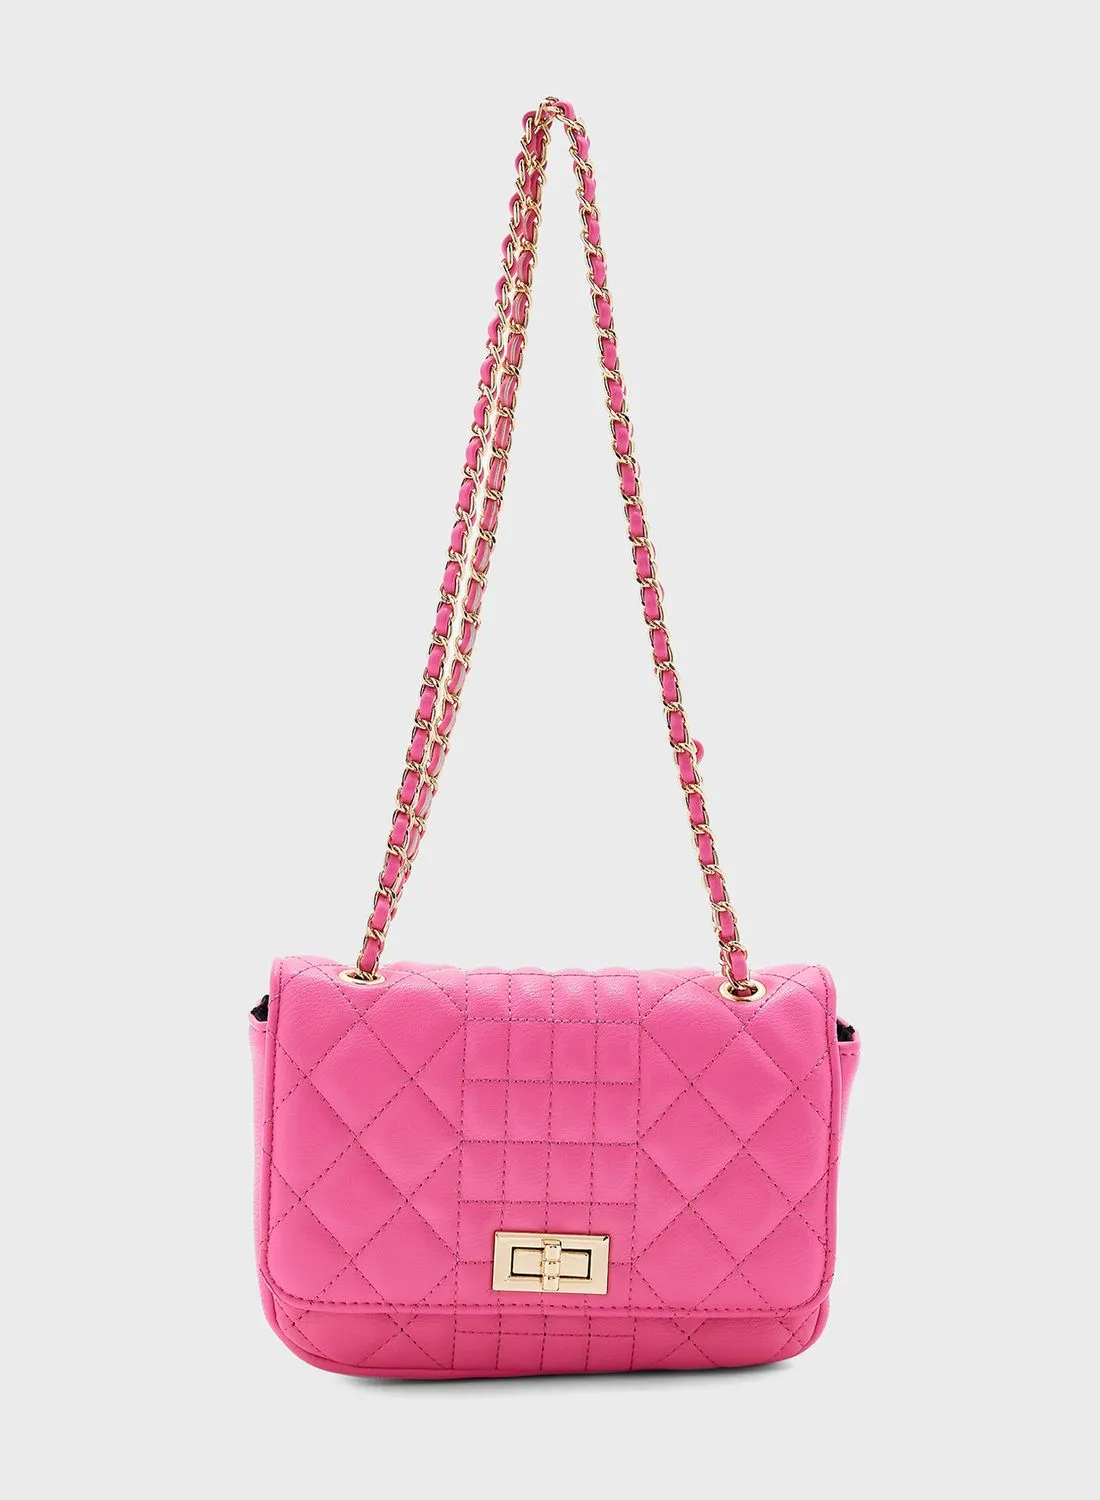 NEW LOOK Blake Quilted Crossbody Bag